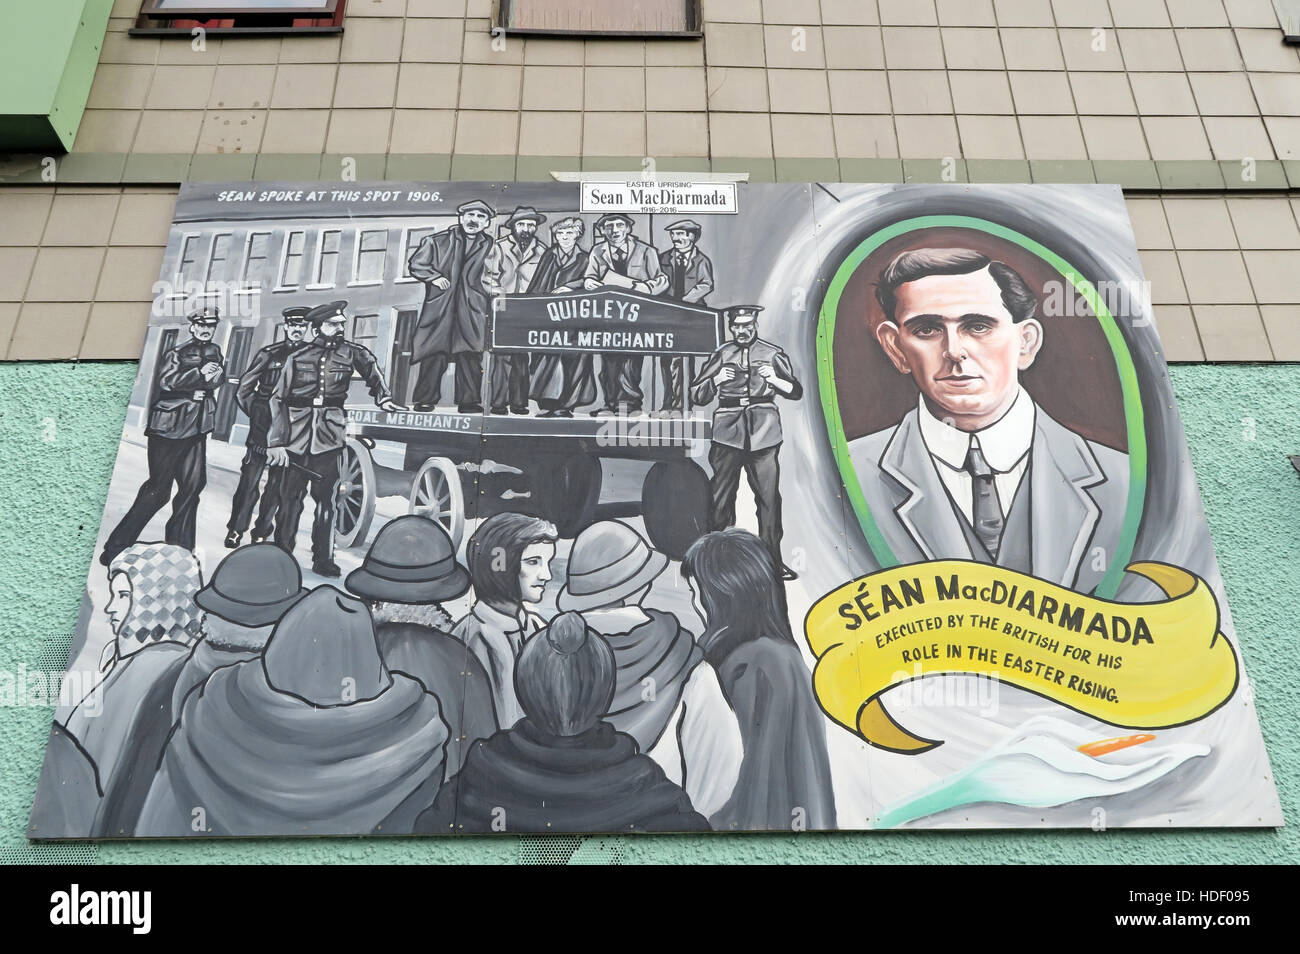 Belfast Falls Rd Republican Mural- Sean MacDiarmada executed by the British for Easter Rising Stock Photo